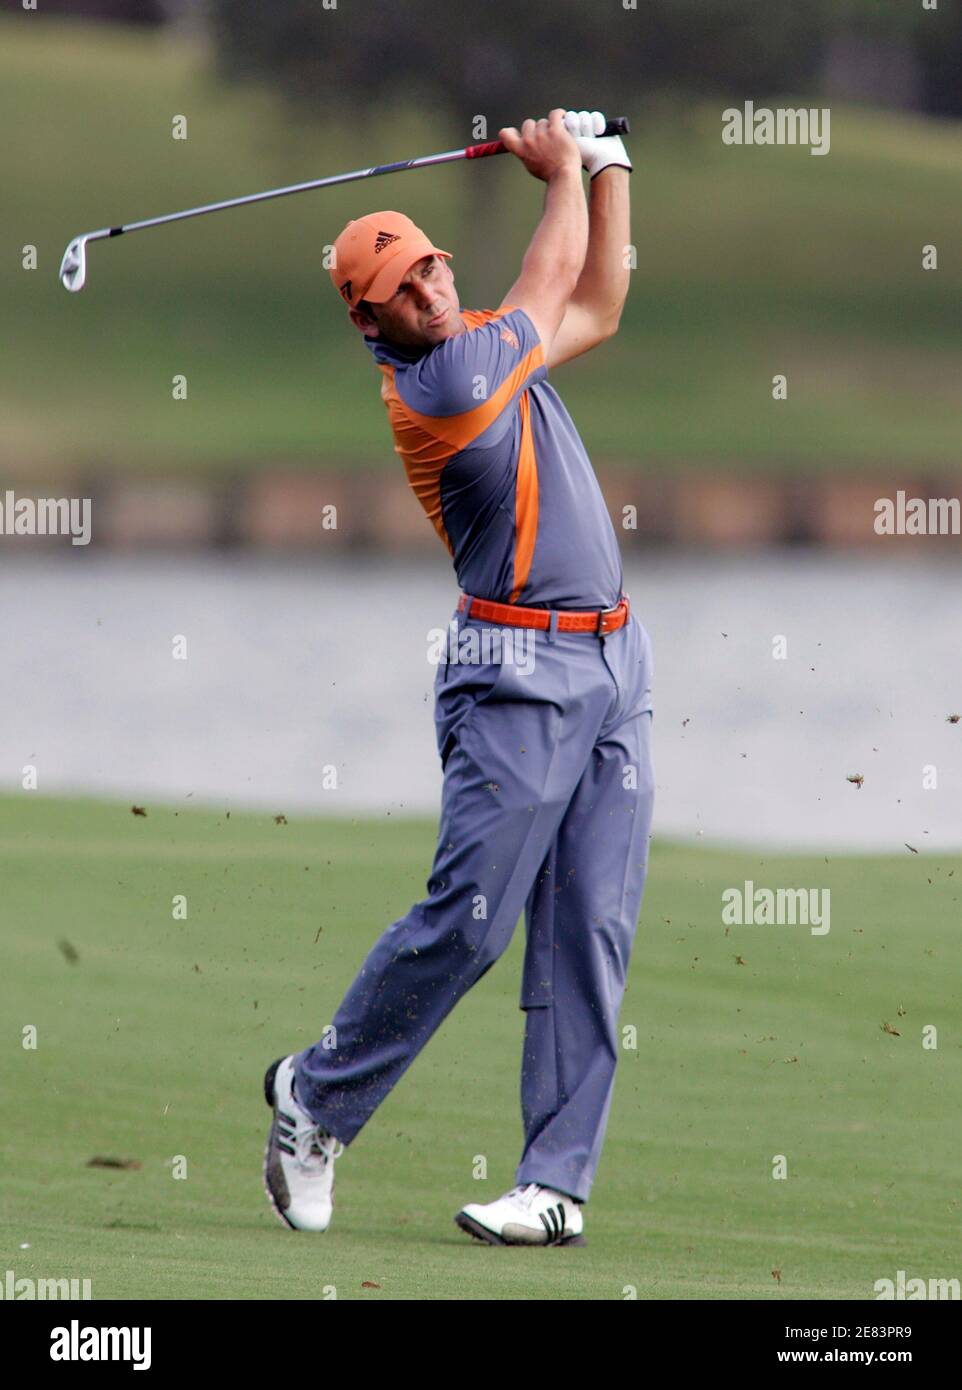 Sergio Garcia of Spain hits off of the 18th fairway during the first round of play at The Players Championship golf tournament in Ponte Vedra Beach, Florida May 10, 2007. REUTERS/Rick Fowler (UNITED STATES) Stock Photo